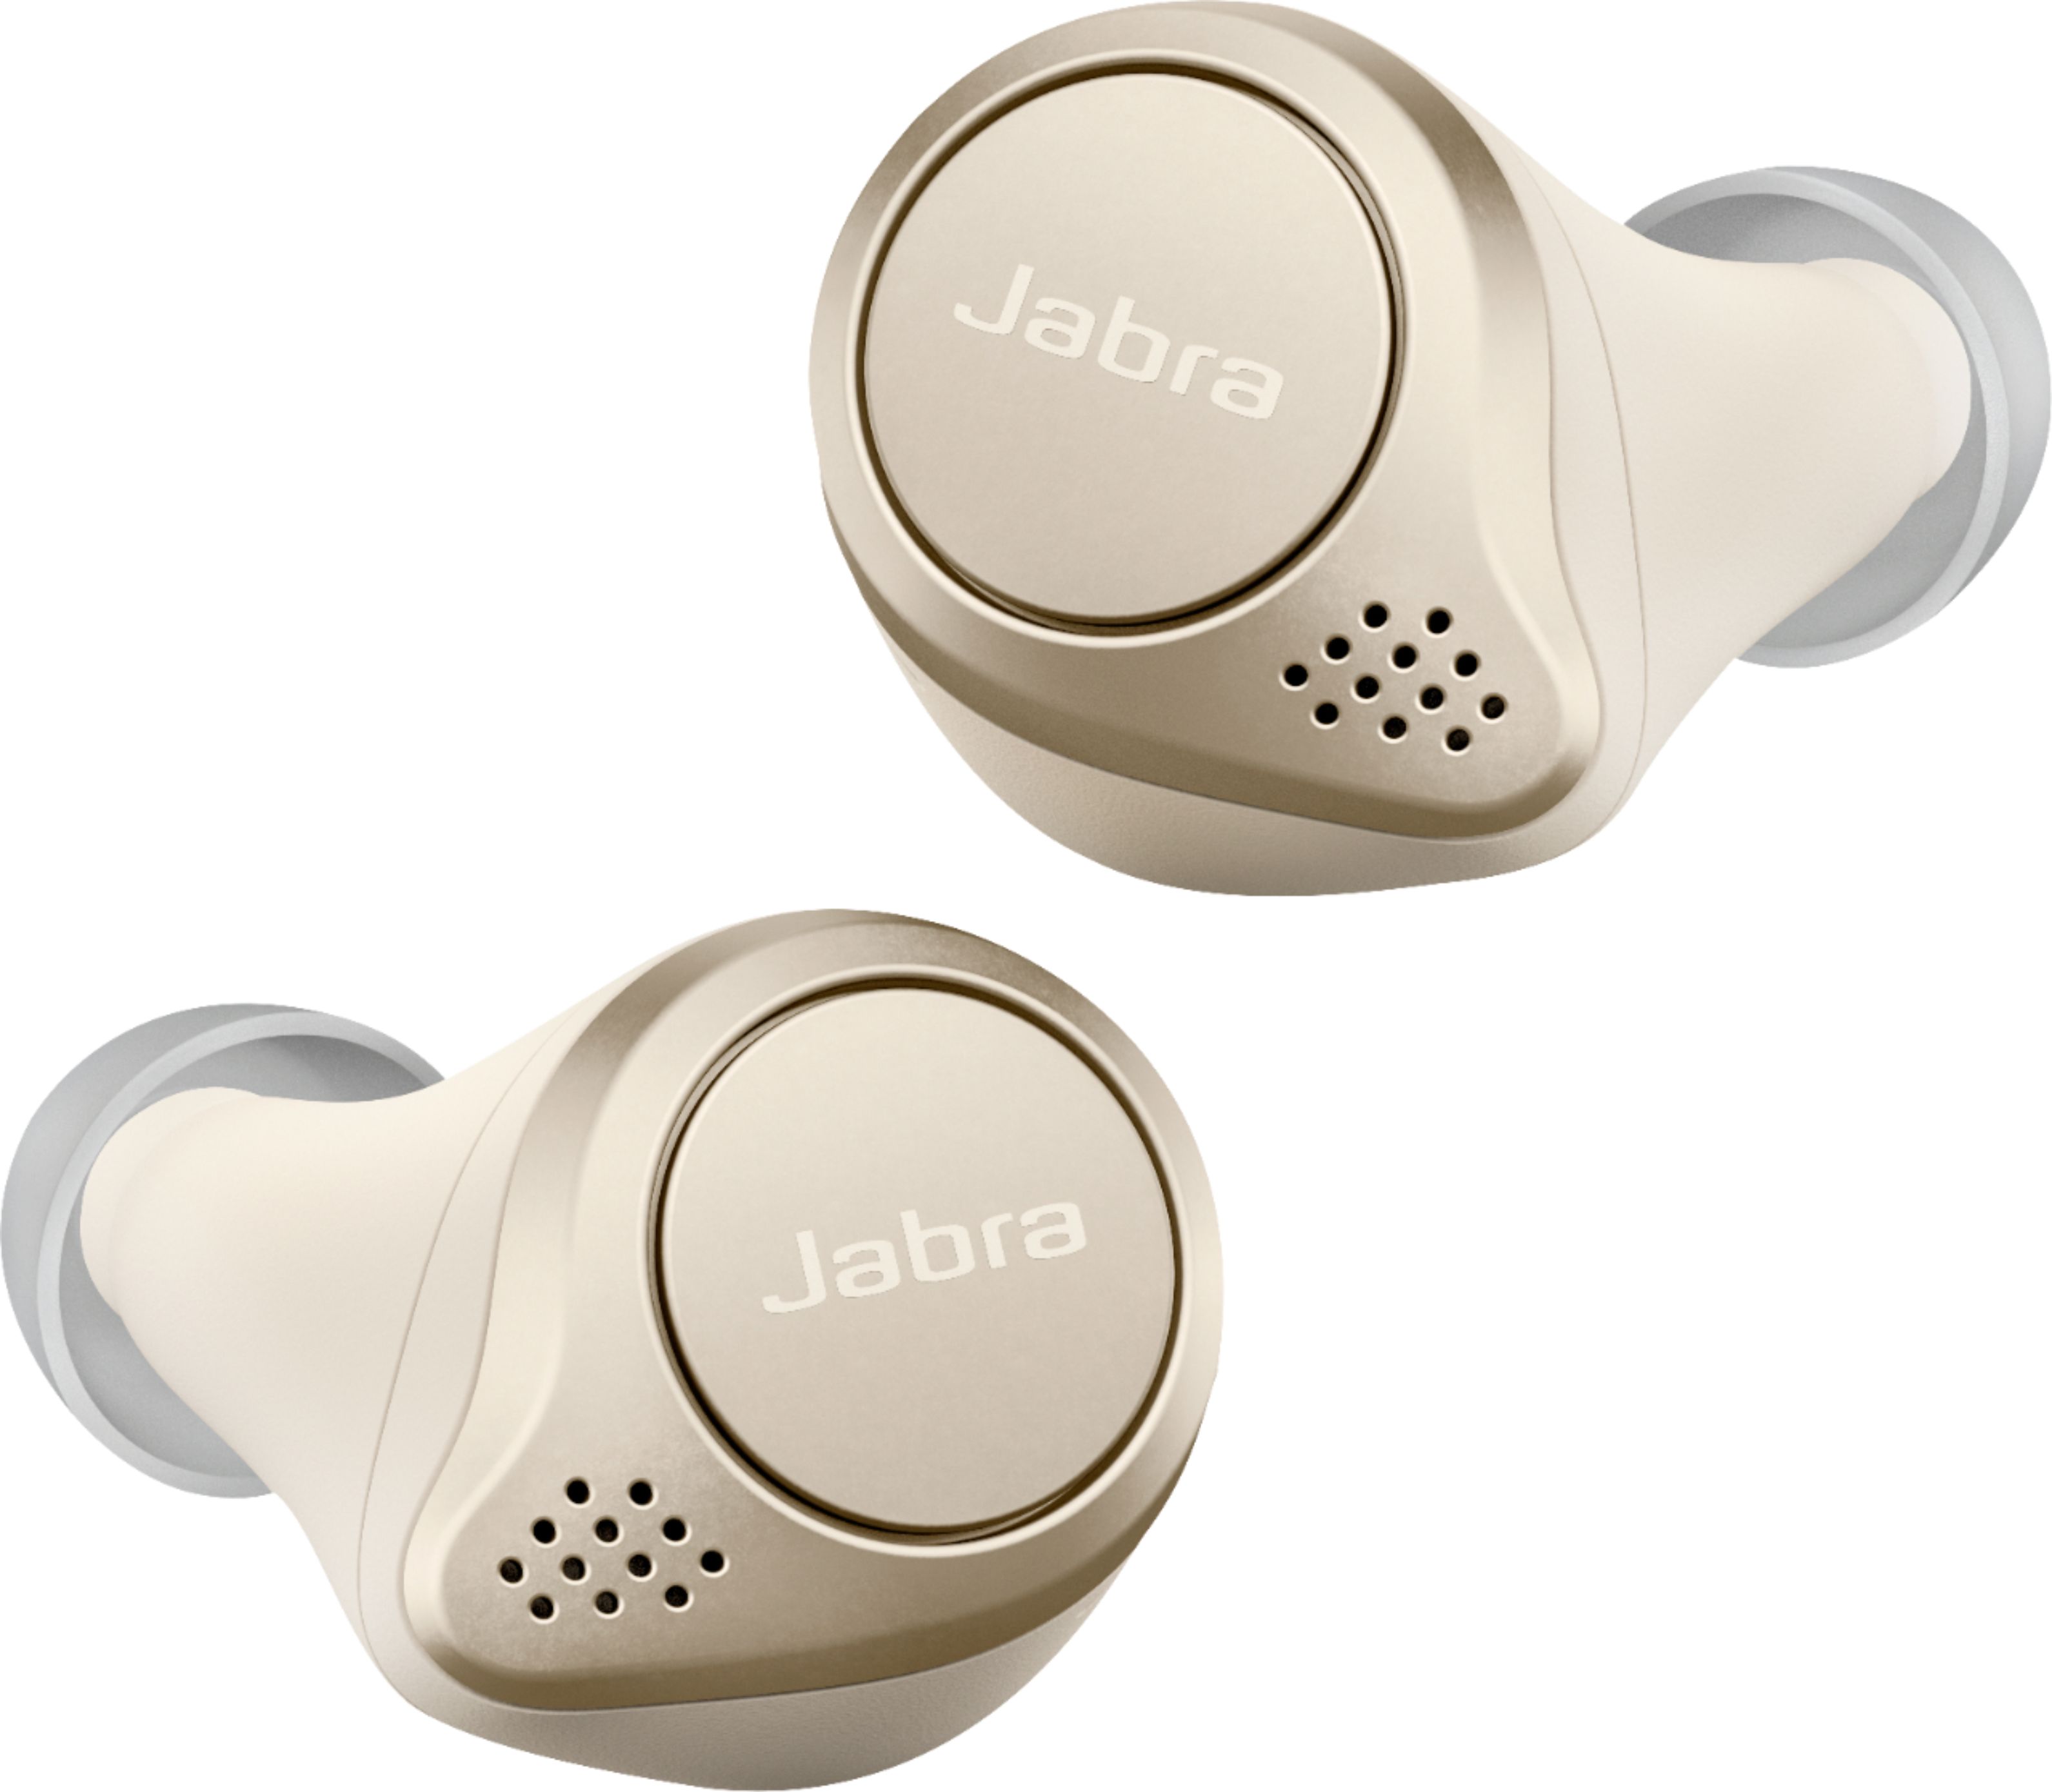  Jabra Elite 7 Pro in Ear Bluetooth Earbuds - Adjustable Active  Noise Cancellation True Wireless Buds in a Compact Design MultiSensor Voice  Technology for Clear Calls - Gold Beige : Electronics